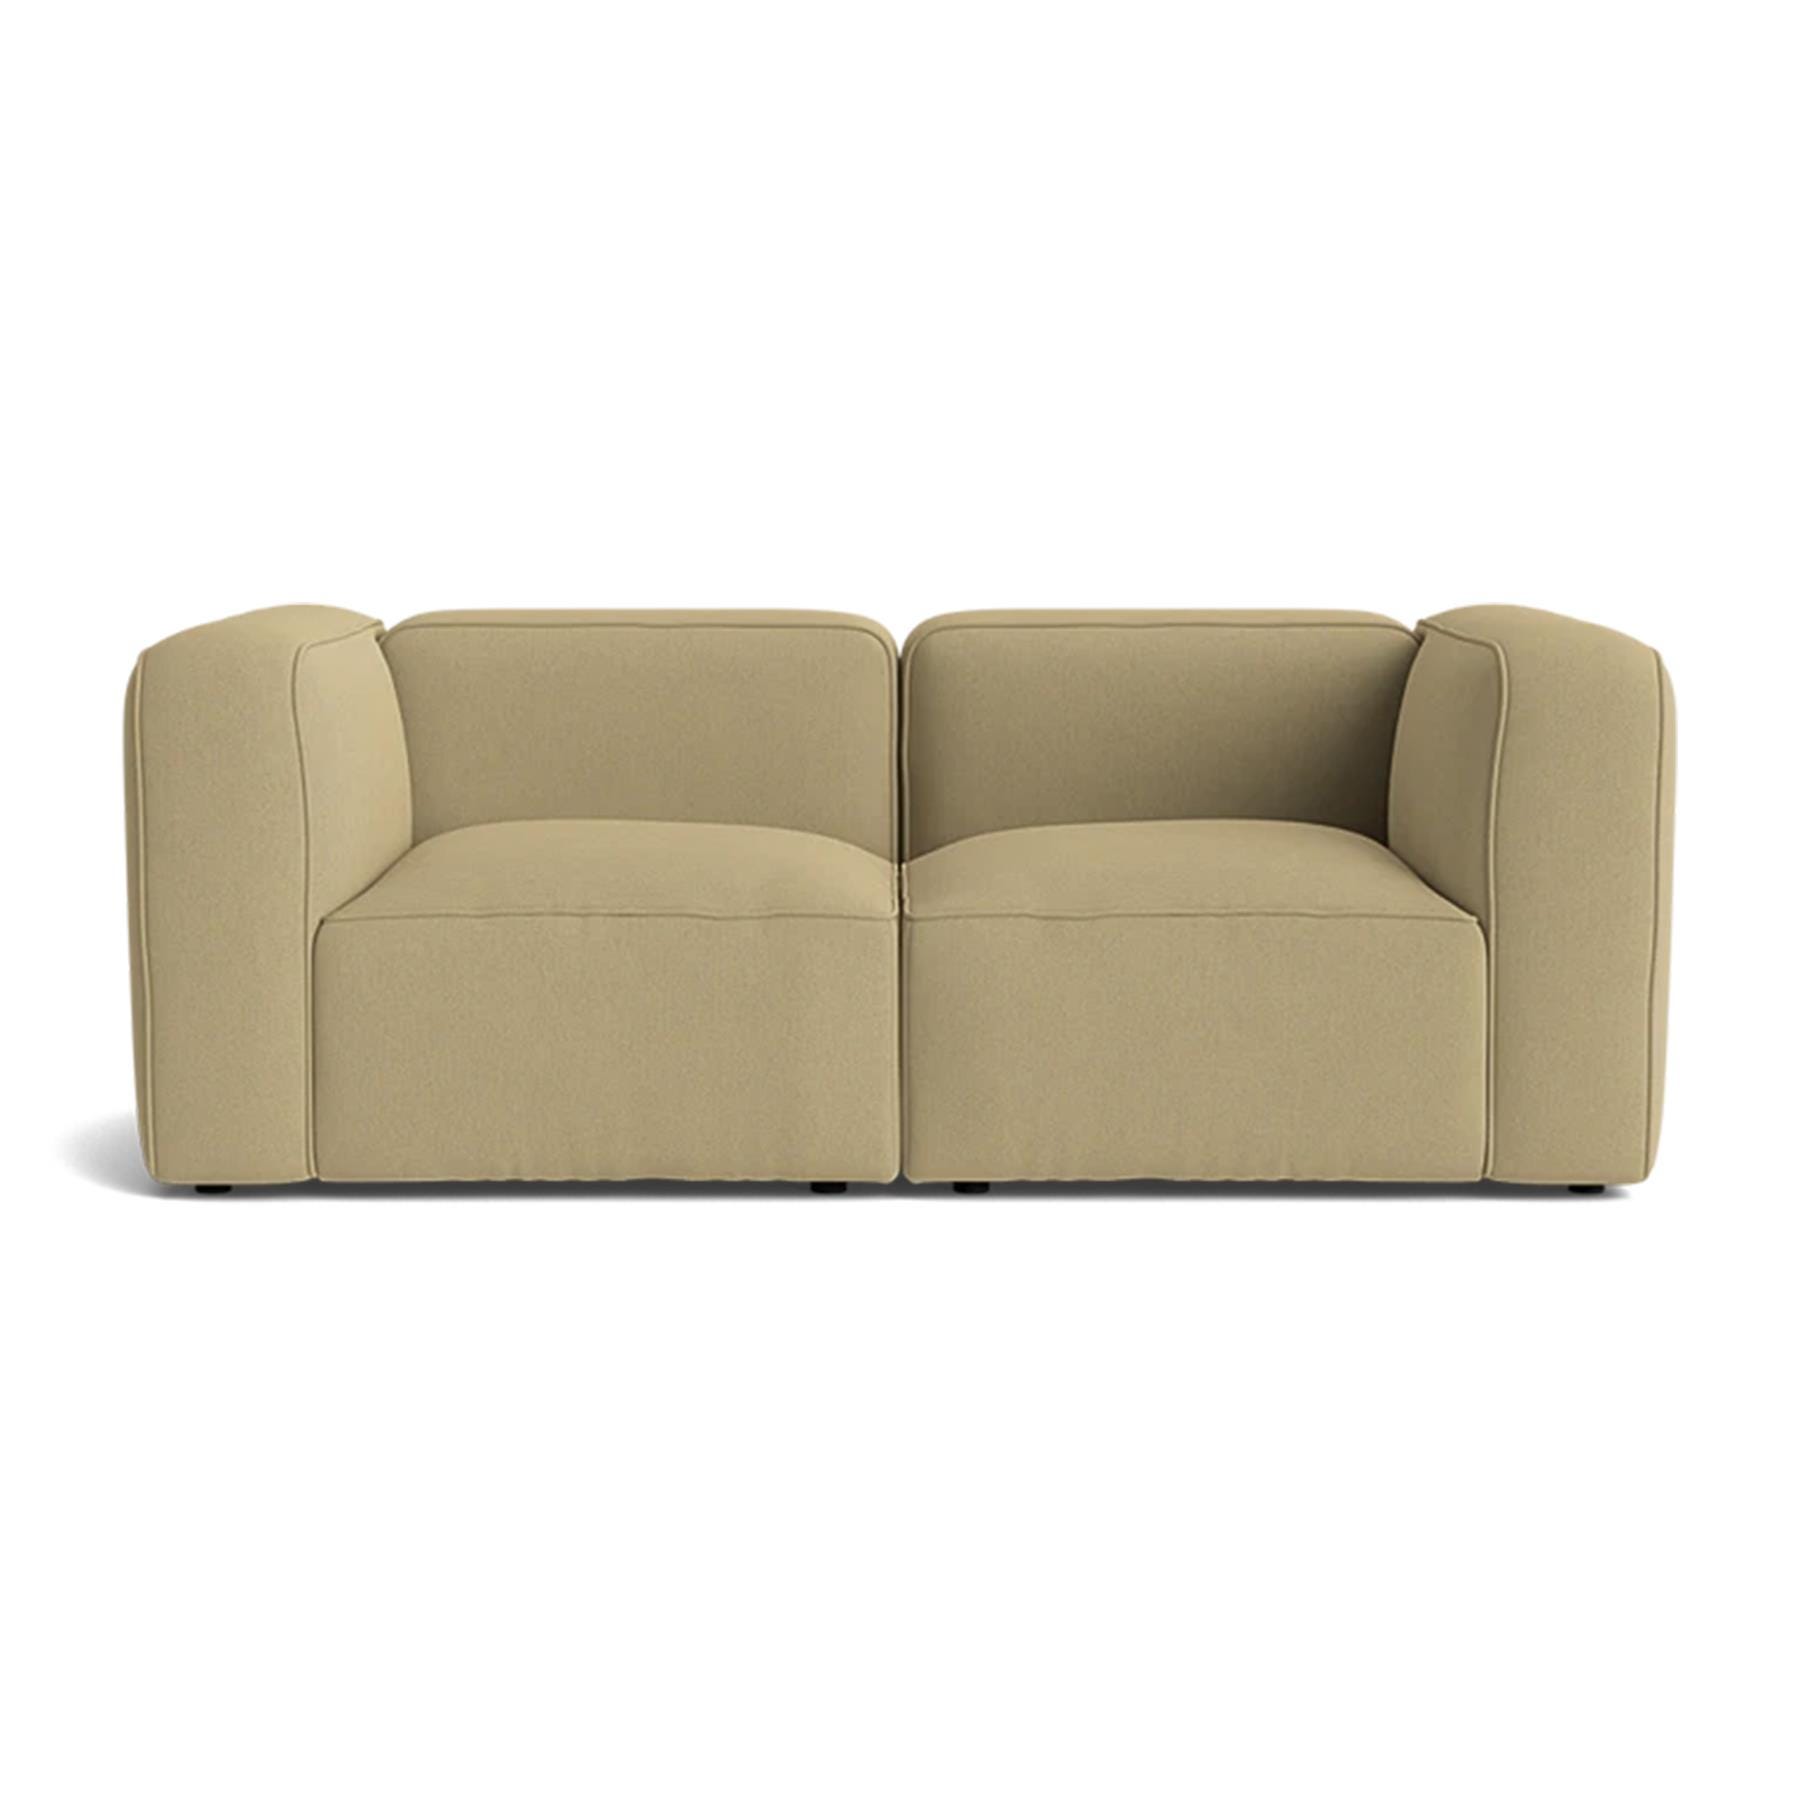 Make Nordic Basecamp 2 Seater Sofa Fiord 422 Yellow Designer Furniture From Holloways Of Ludlow